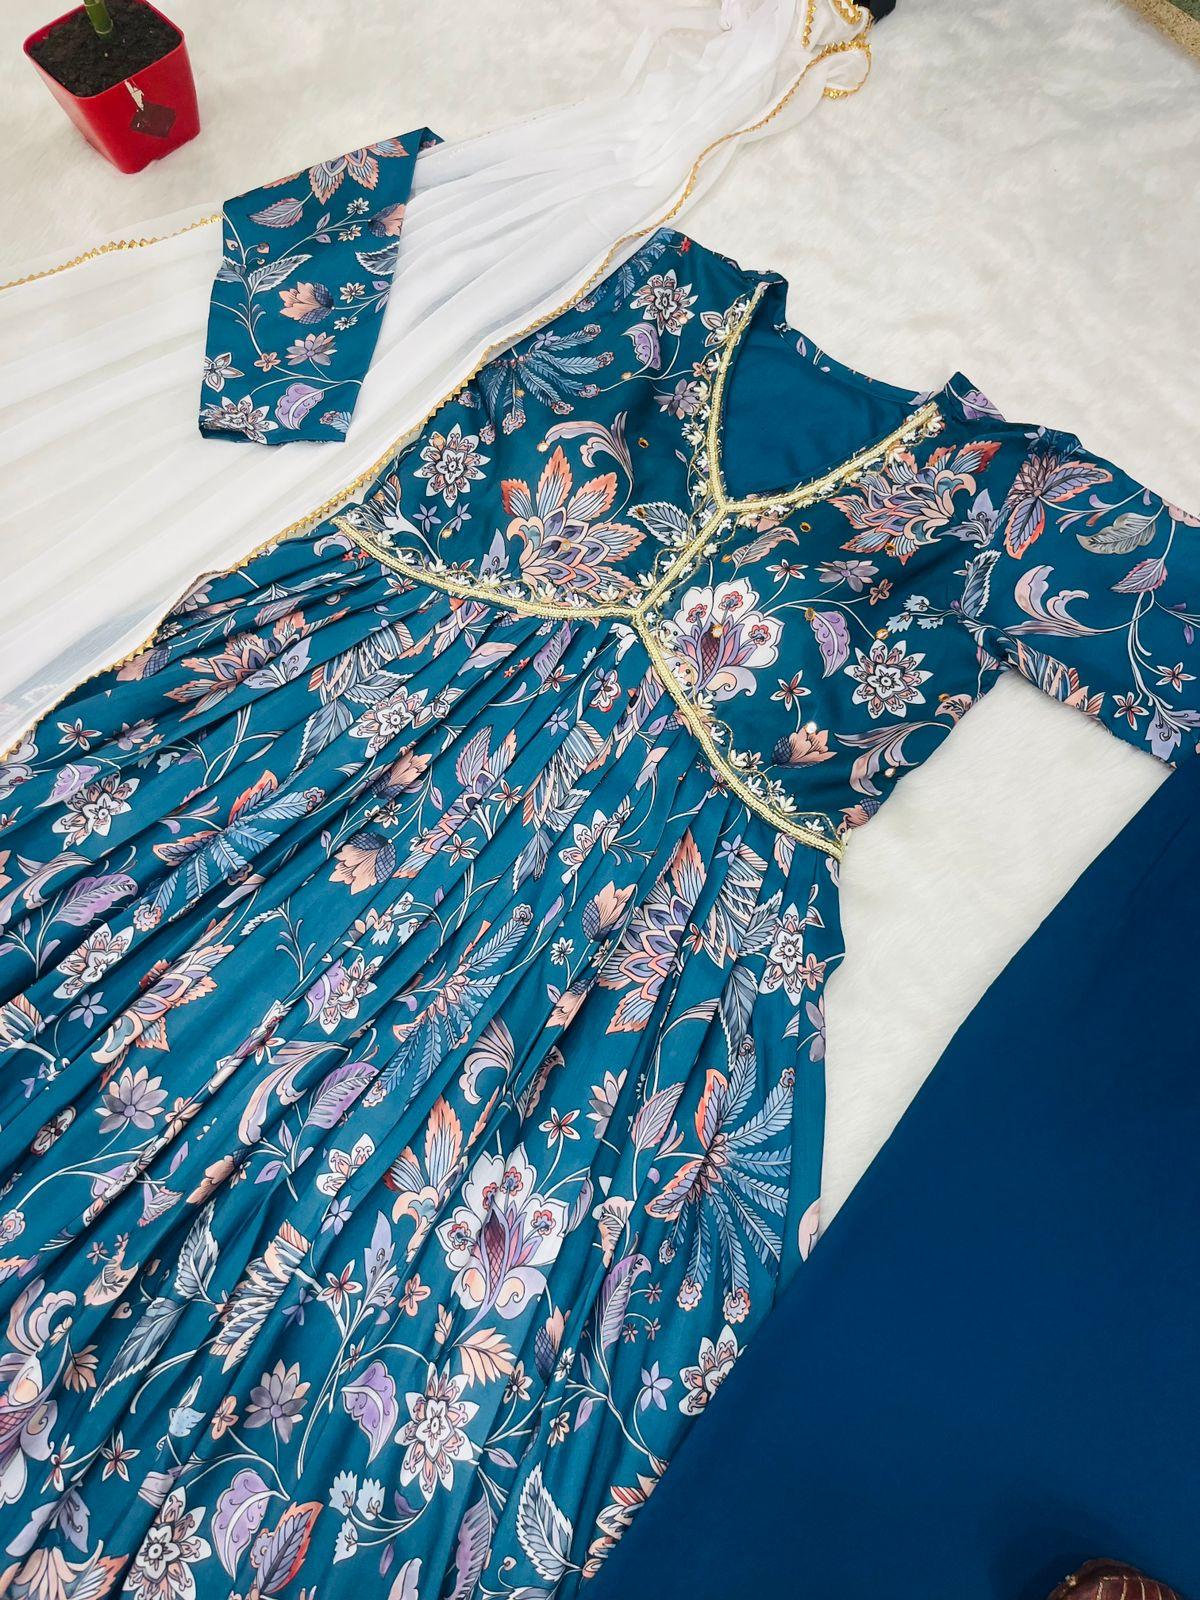 Teal blue Boho Floral Special: Aliya Cut Dresses with Dupatta and Pant! 🌺🌺 - Inayakhan Shop 